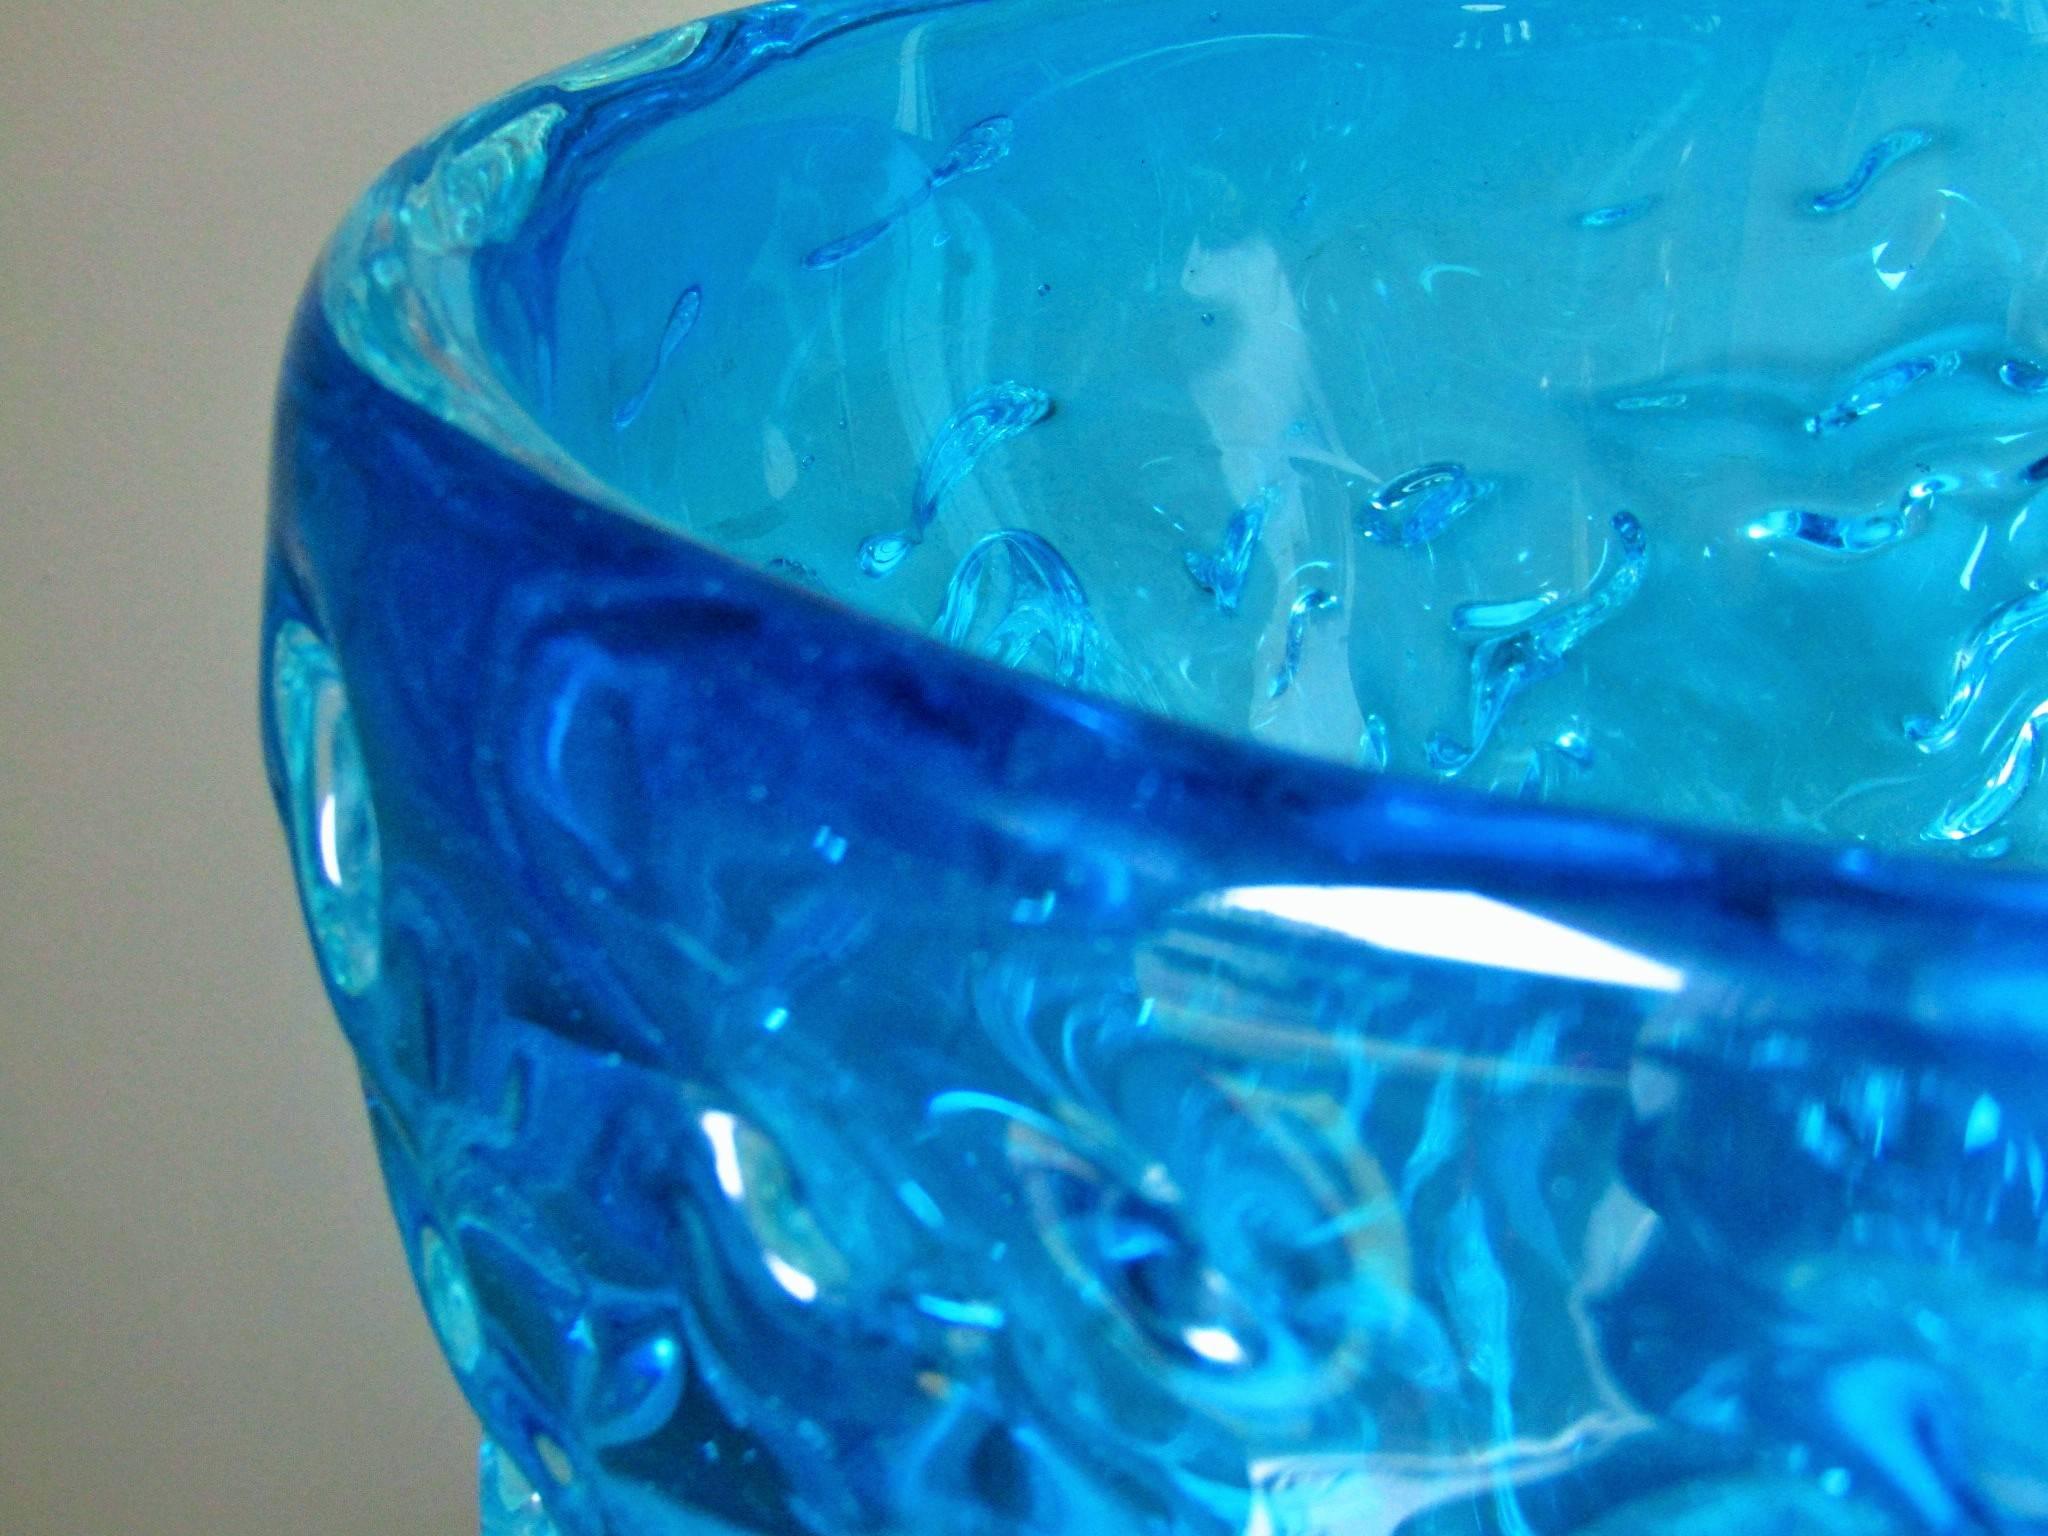 Centerpiece bowl vase champagne cooler blue Murano glass, Italy, 1960s.
Very heavy. Mint condition, no chips.

